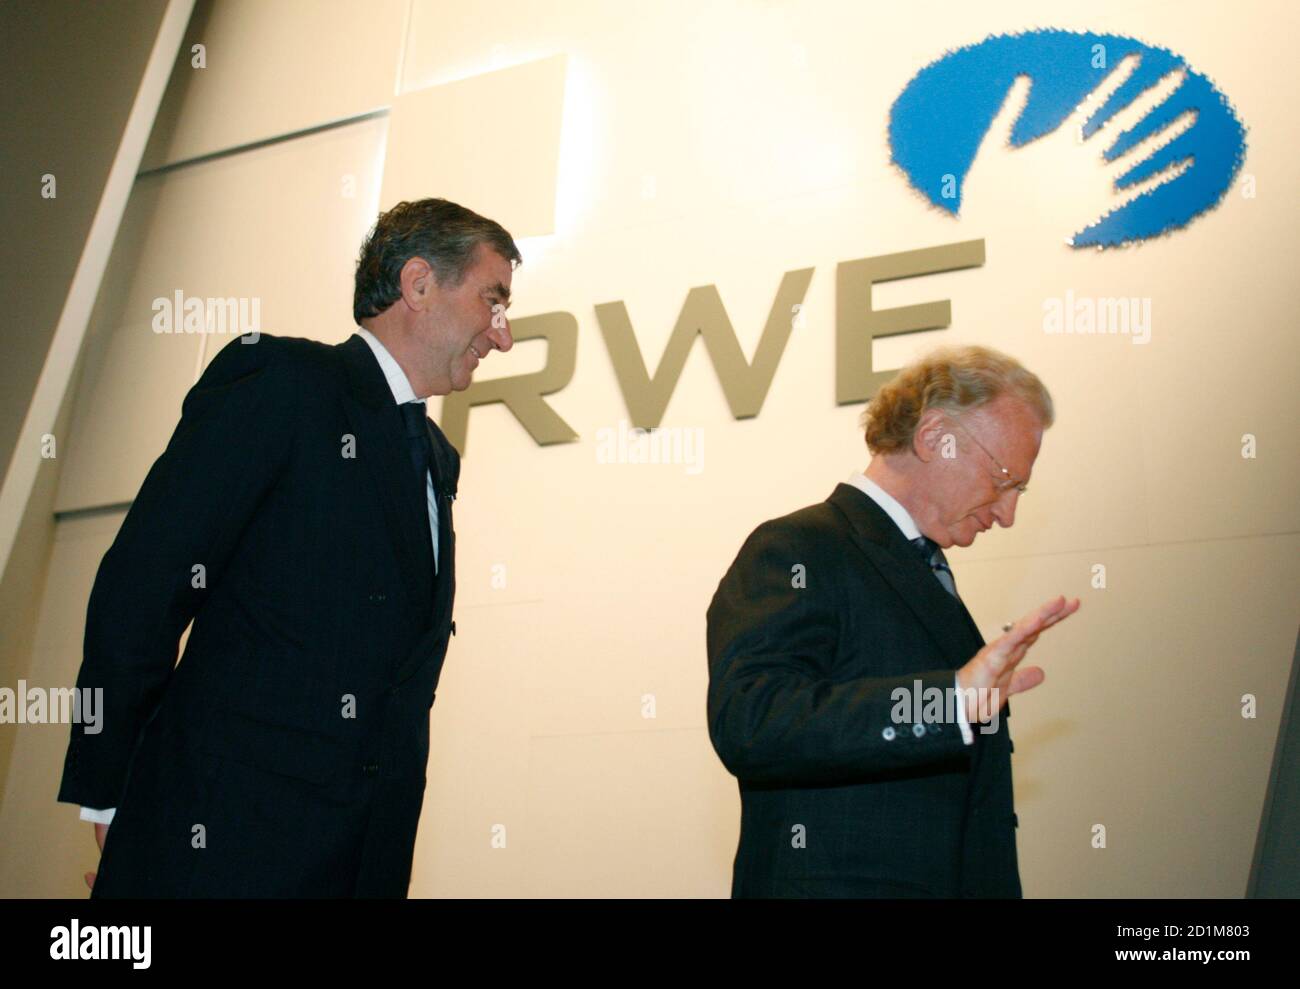 Thomas R. Fischer (R), supervisory board of RWE and Harry Roels, CEO of German multi-utility RWE arrive for the general meeting in Essen April 18, 2007. REUTERS/Ina Fassbender     (GERMANY) Stock Photo